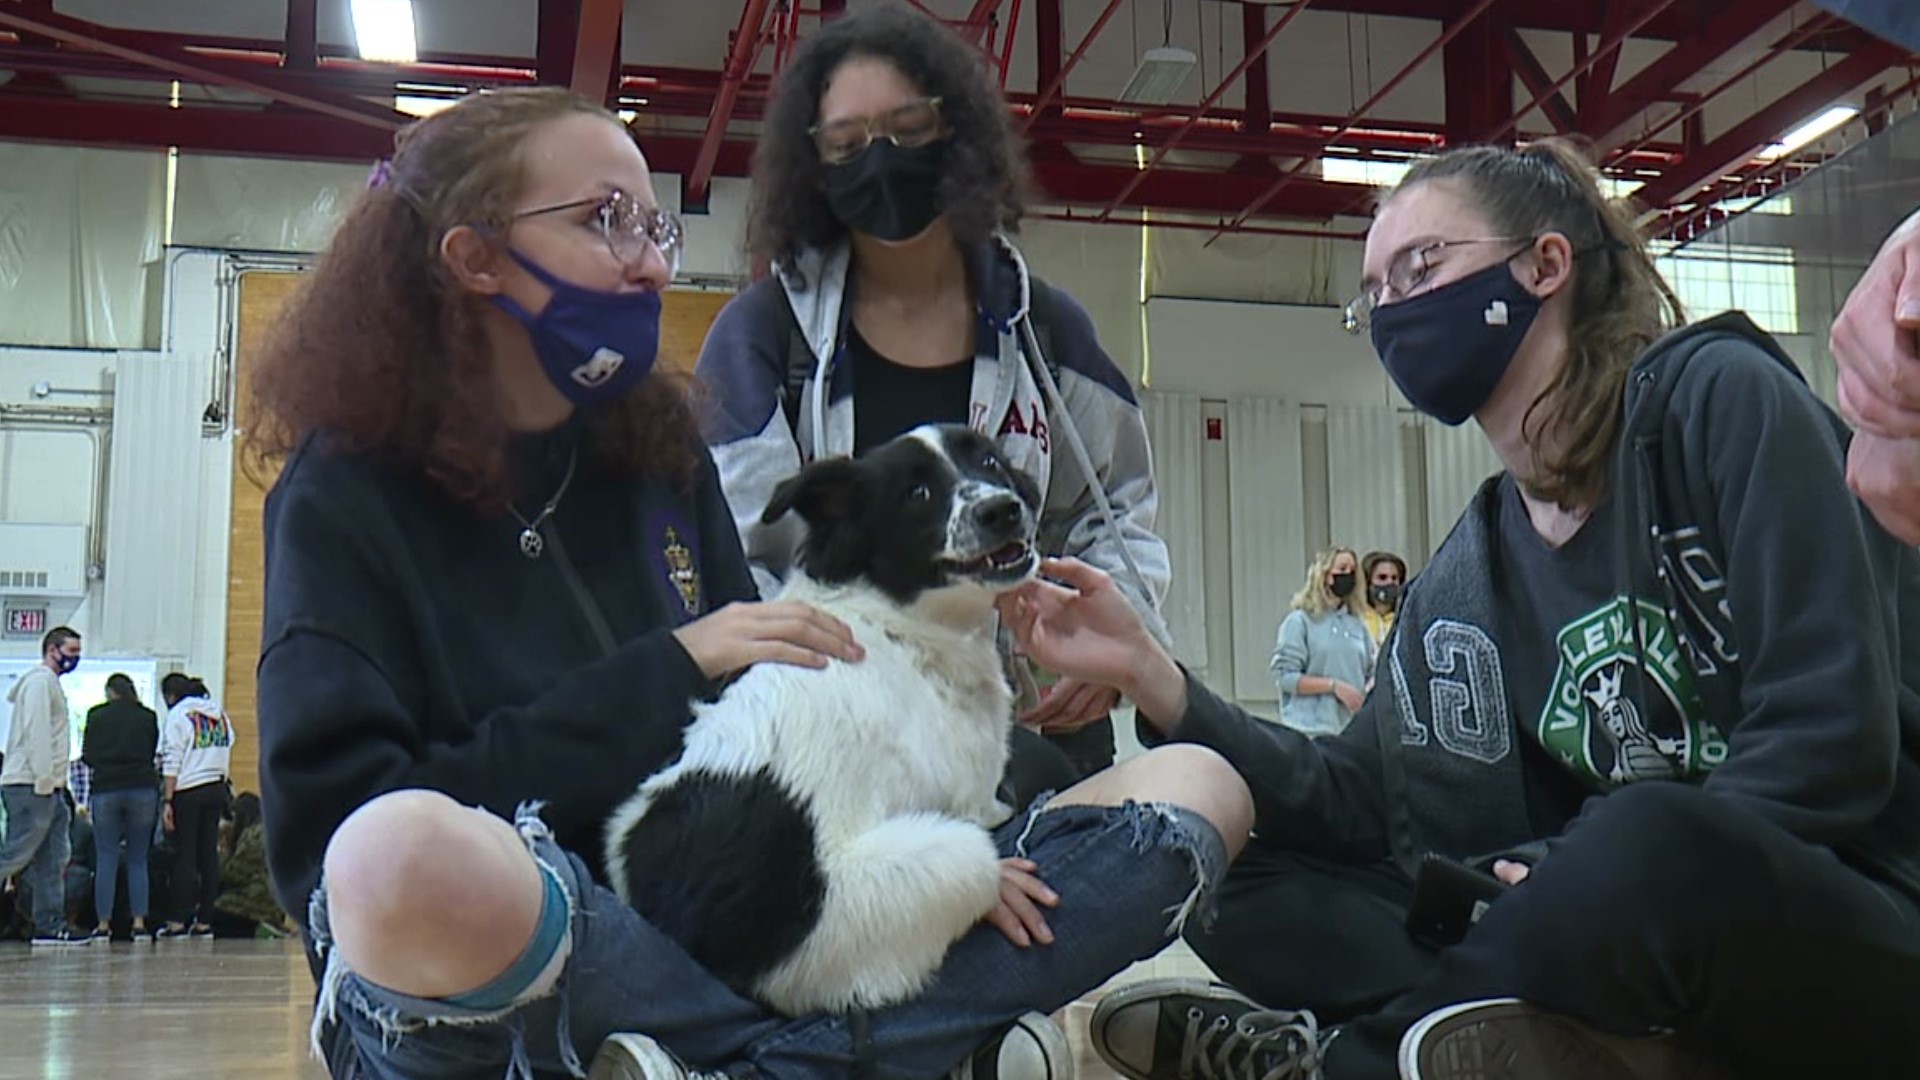 Each semester ahead of midterms, students are treated to dog therapy.